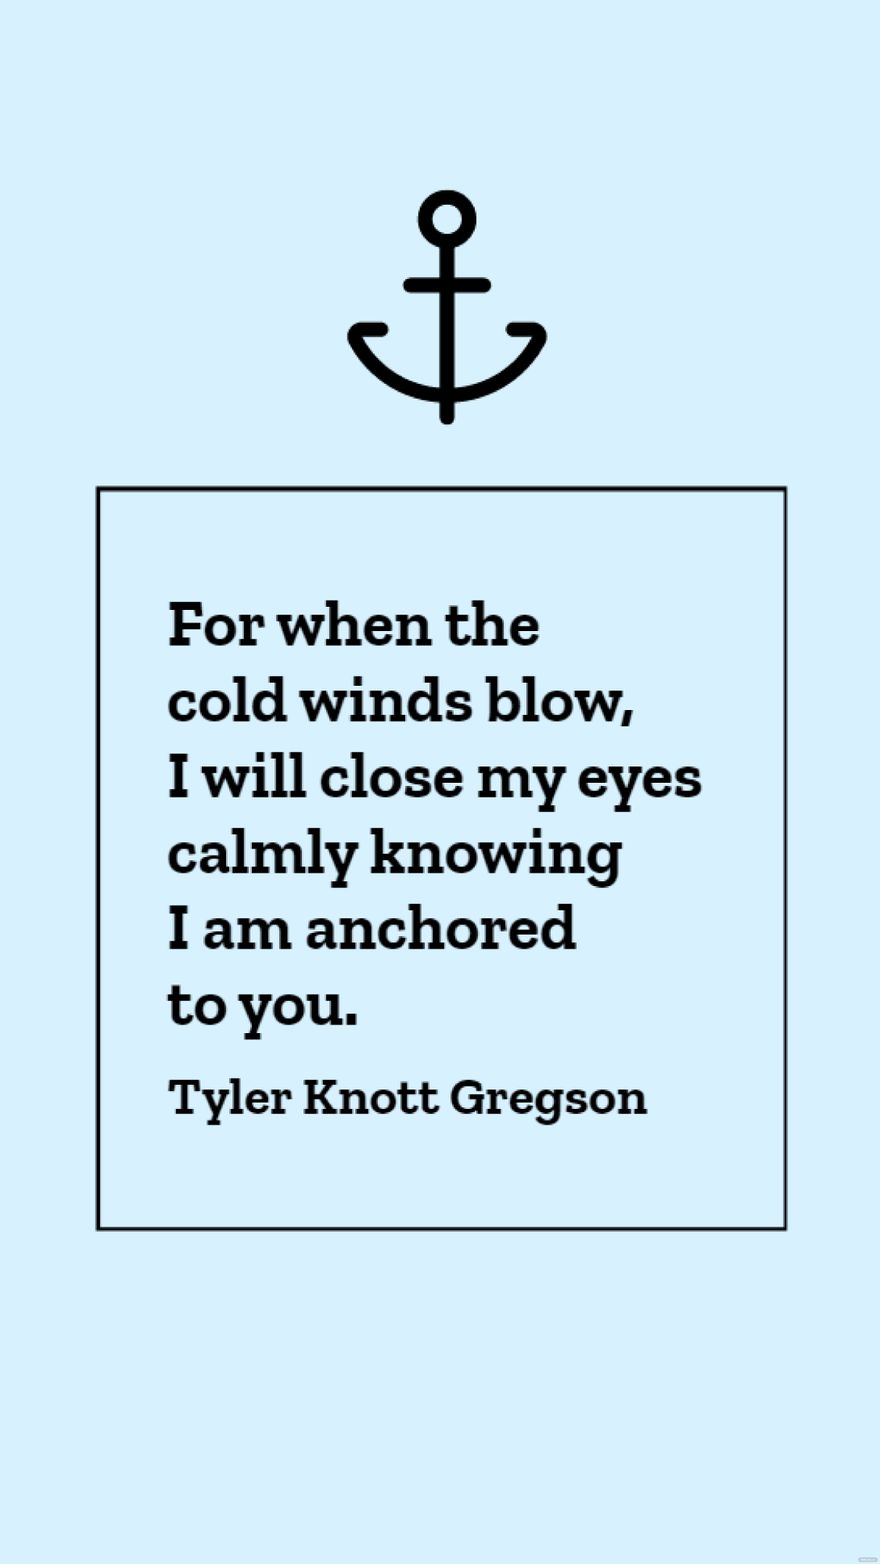 Free Tyler Knott Gregson - For when the cold winds blow, I will close my eyes calmly knowing I am anchored to you. in JPG